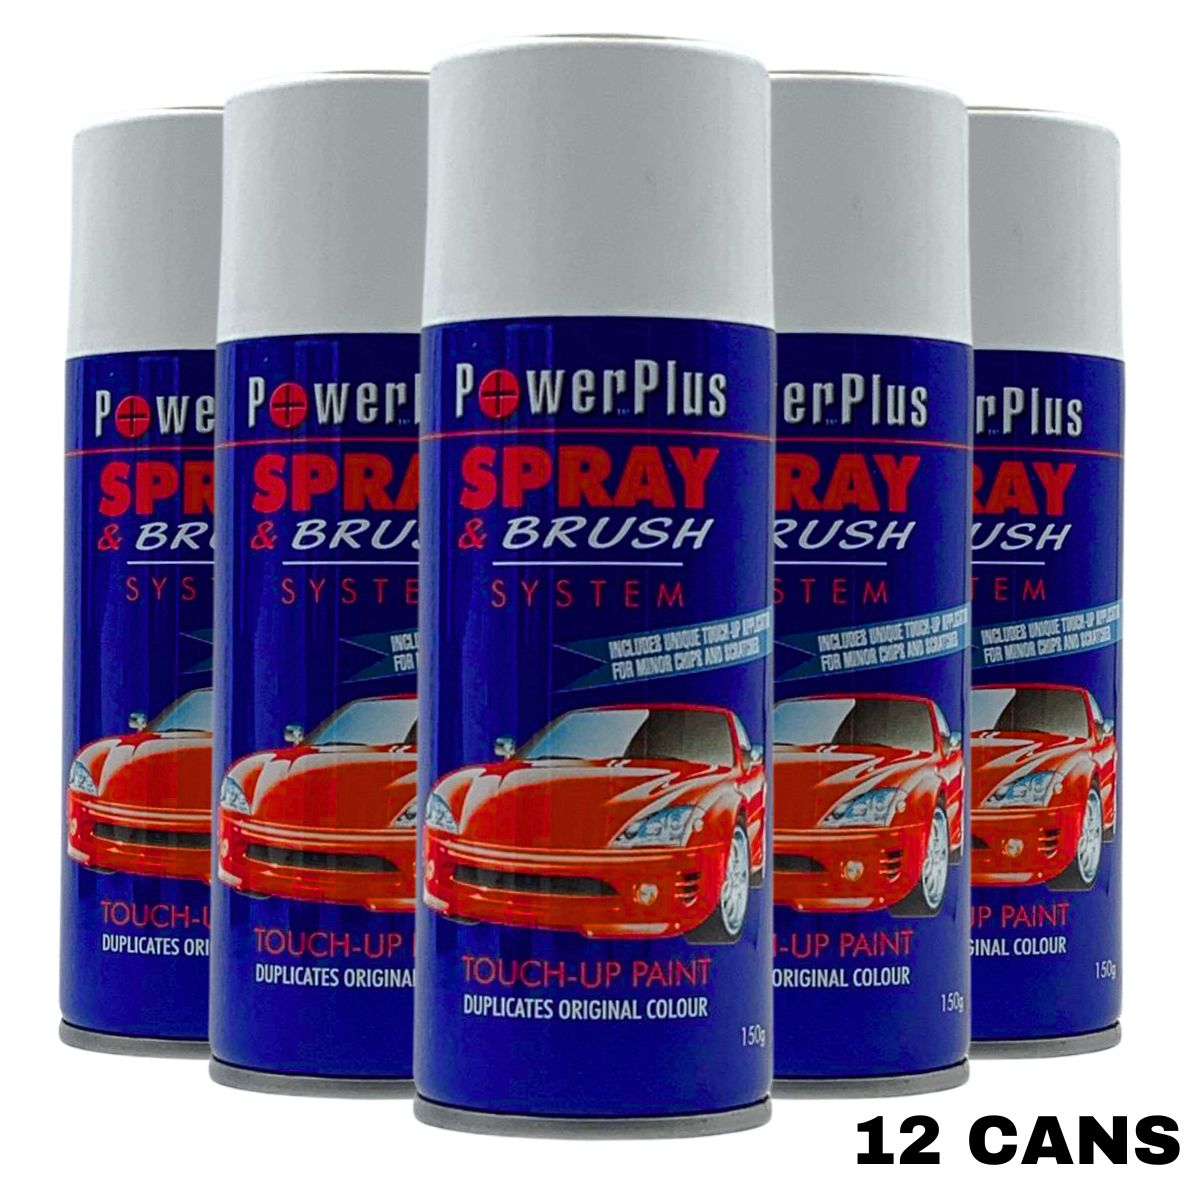 (12 Cans) Automotive Touch up paint Powerplus Spray & Brush System (150grams)